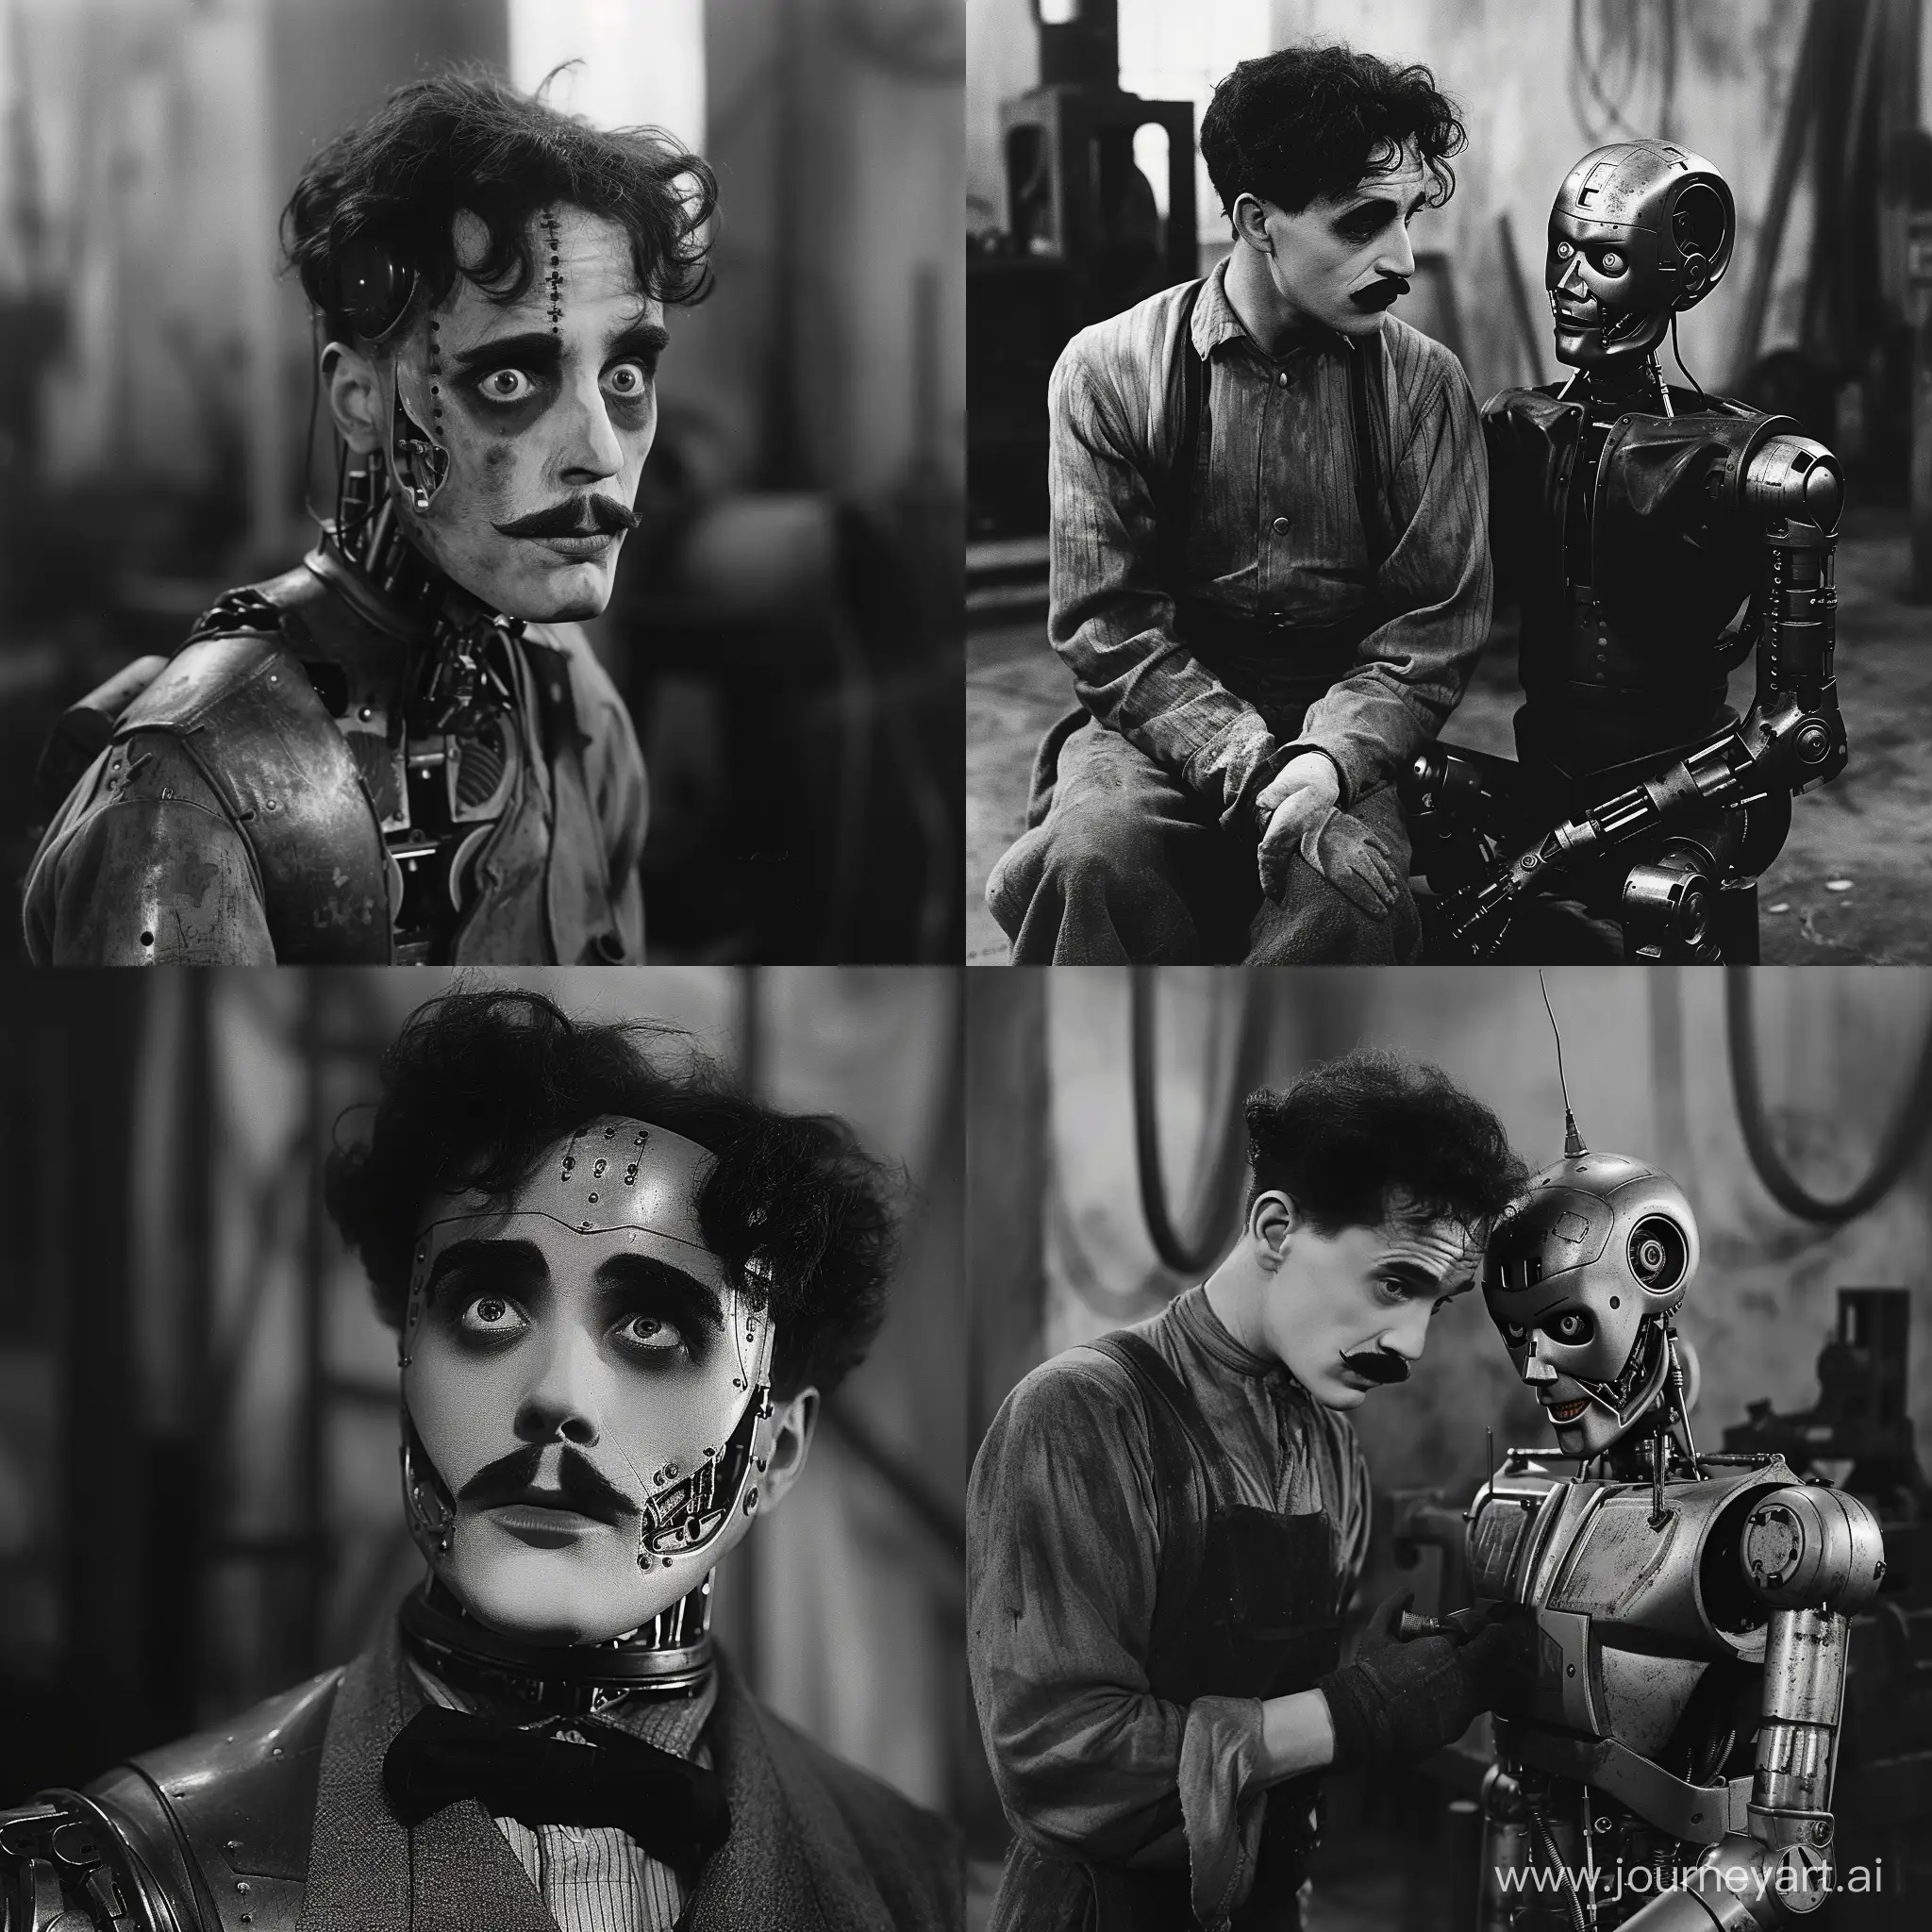 Charlie Chaplin in the style of the Terminator movie